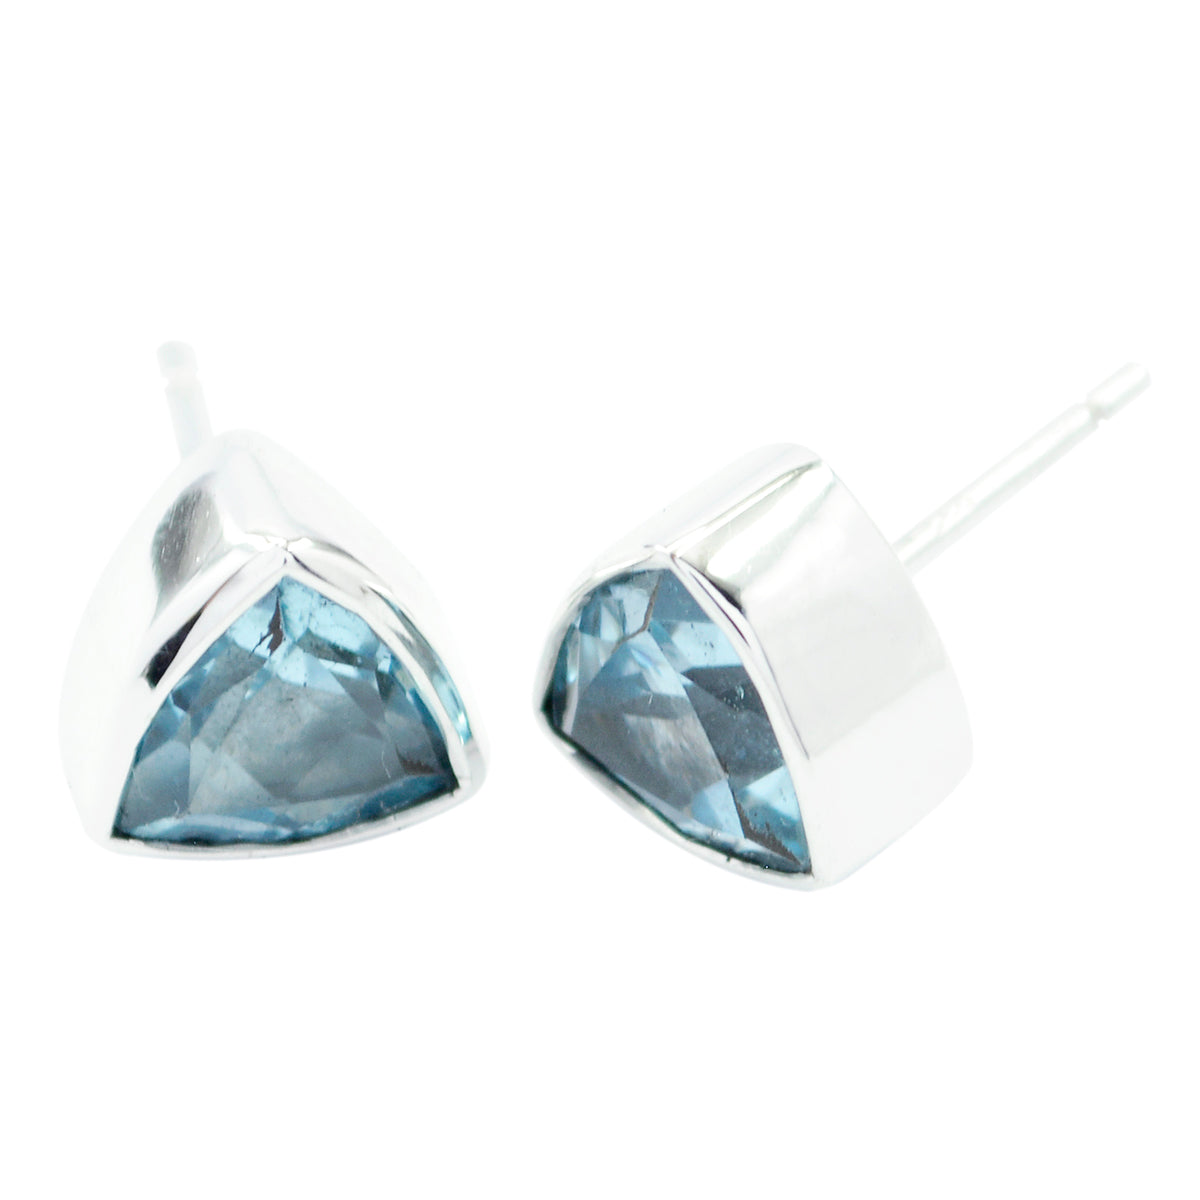 Riyo Nice Gemstone trillion Faceted Blue Topaz Silver Earring gift for Faishonable day